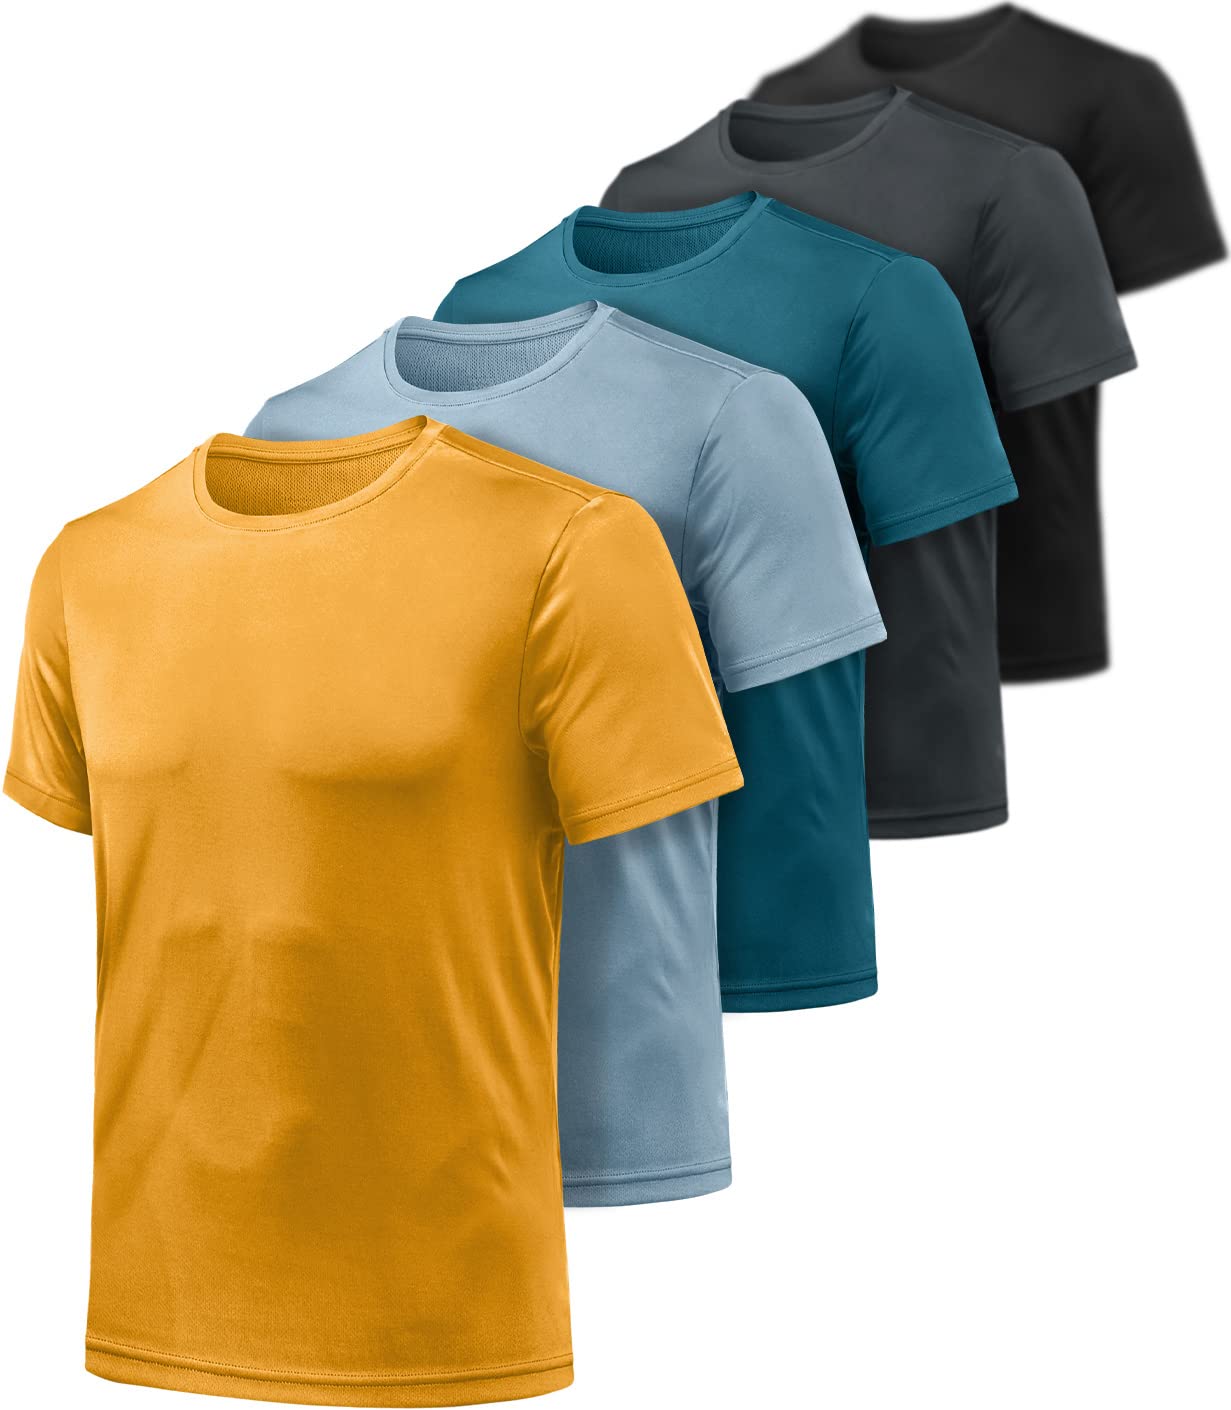 ATHLIO Mens Workout Running Shirts Sun Protection Quick Dry Athletic Shirts Short Sleeve Gym T-Shirts Vent Cool 5pack Bla